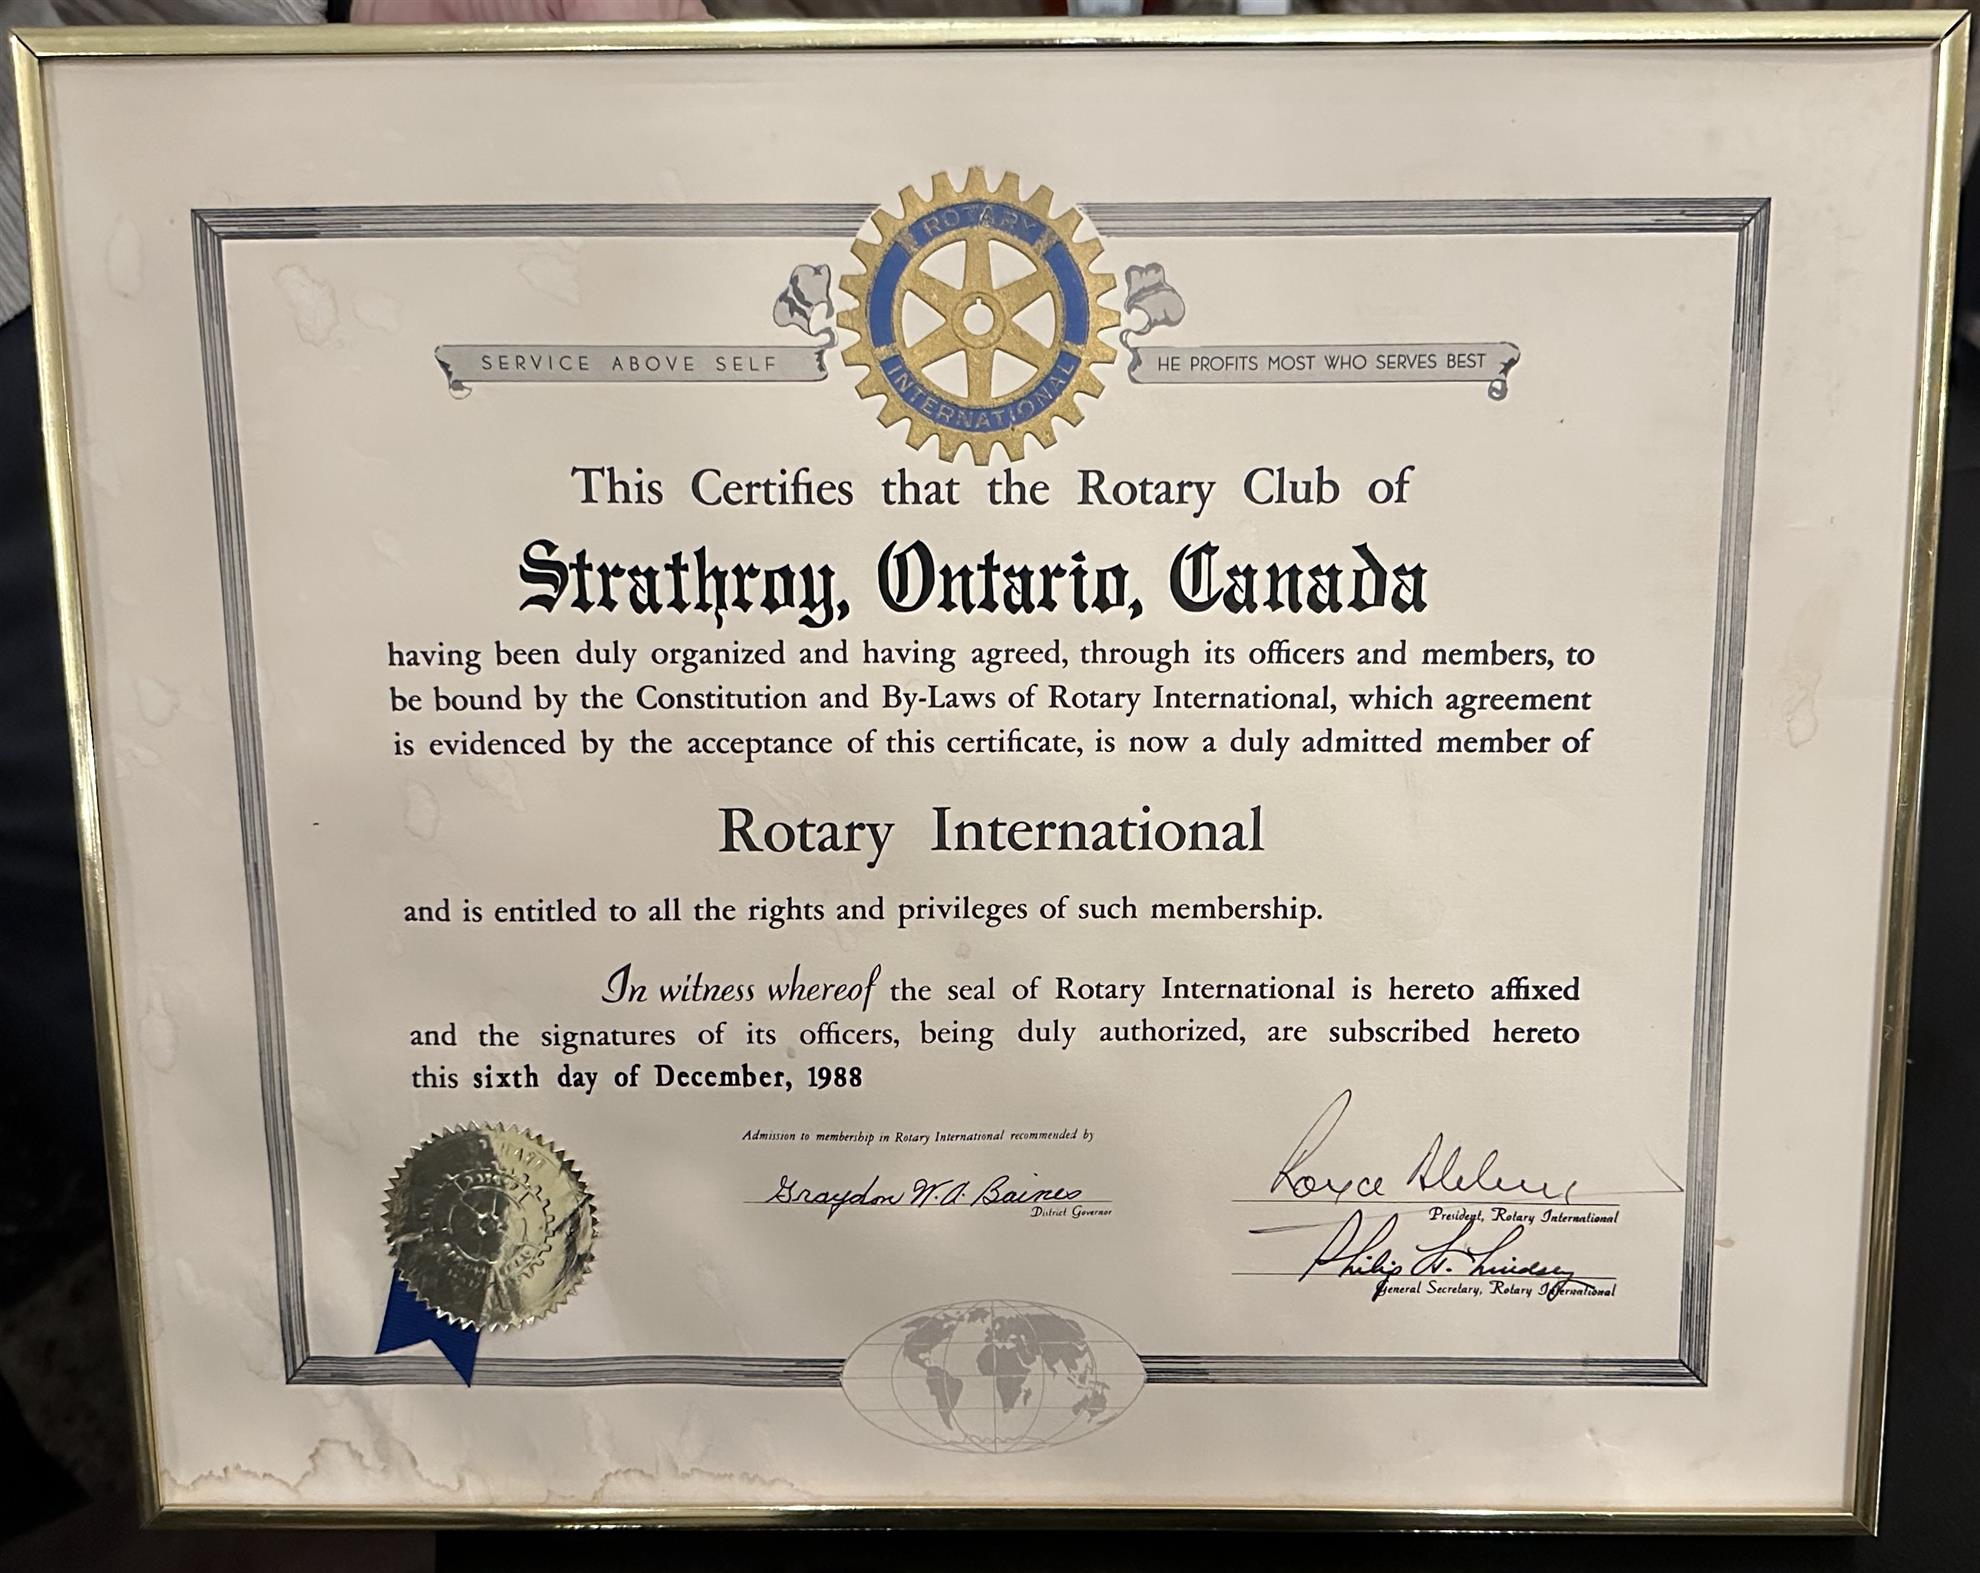 Picture of the original charter of the Strathroy Rotary Club